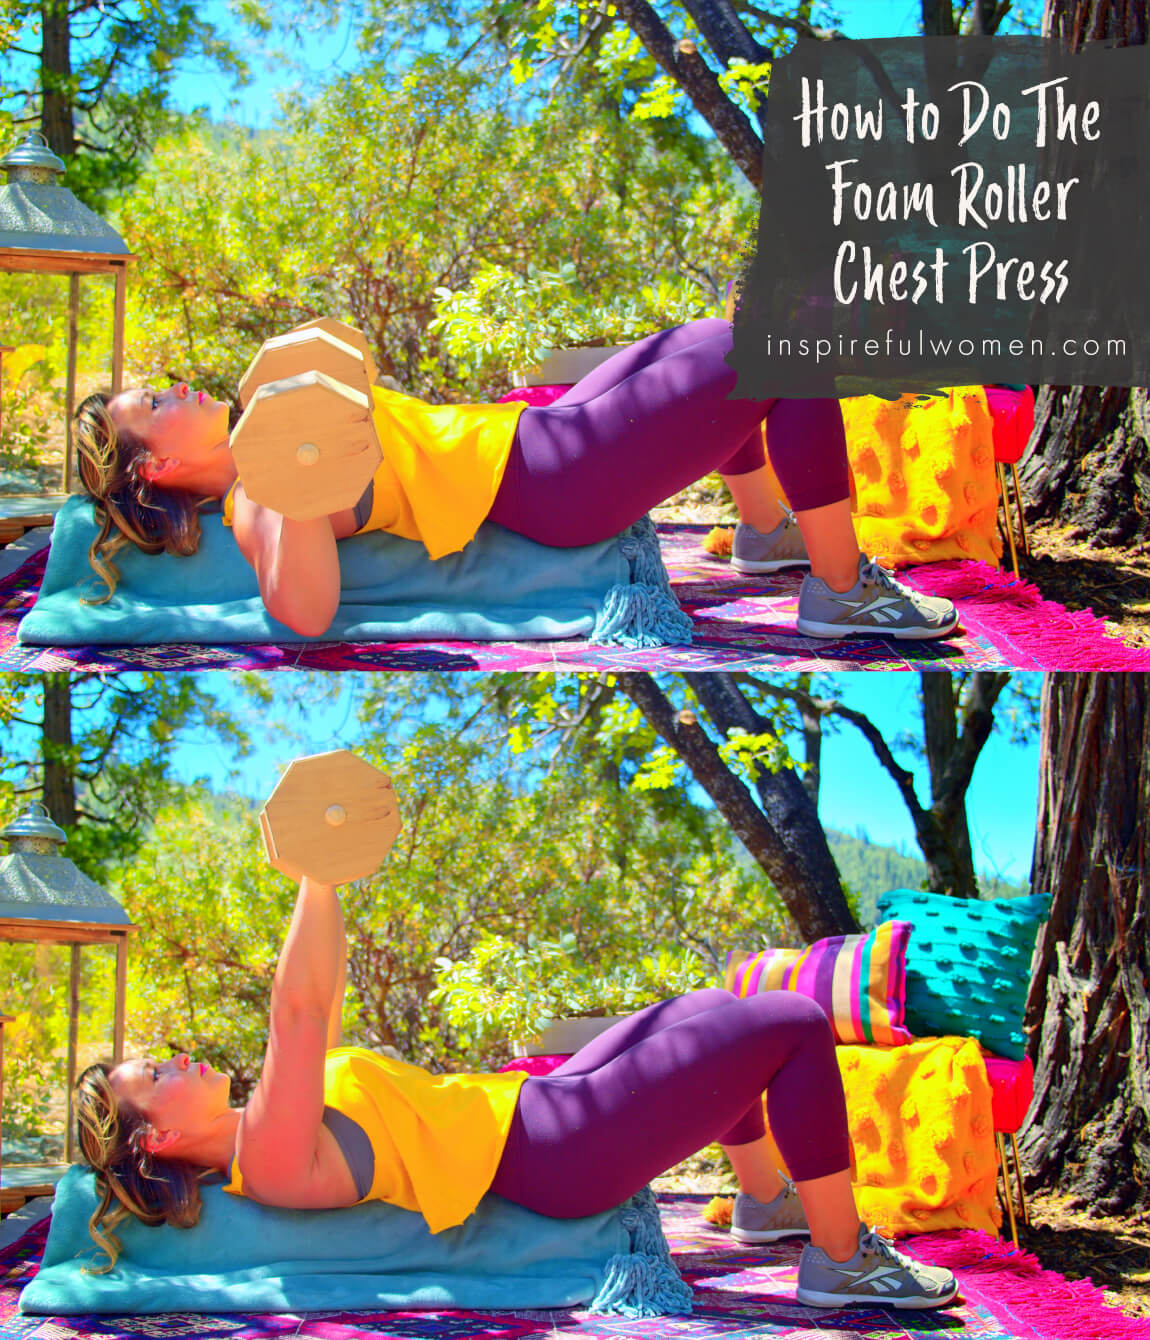 how-to-foam-roller-dumbbell-chest-press-at-home-pec-chest-exercise-proper-form-side